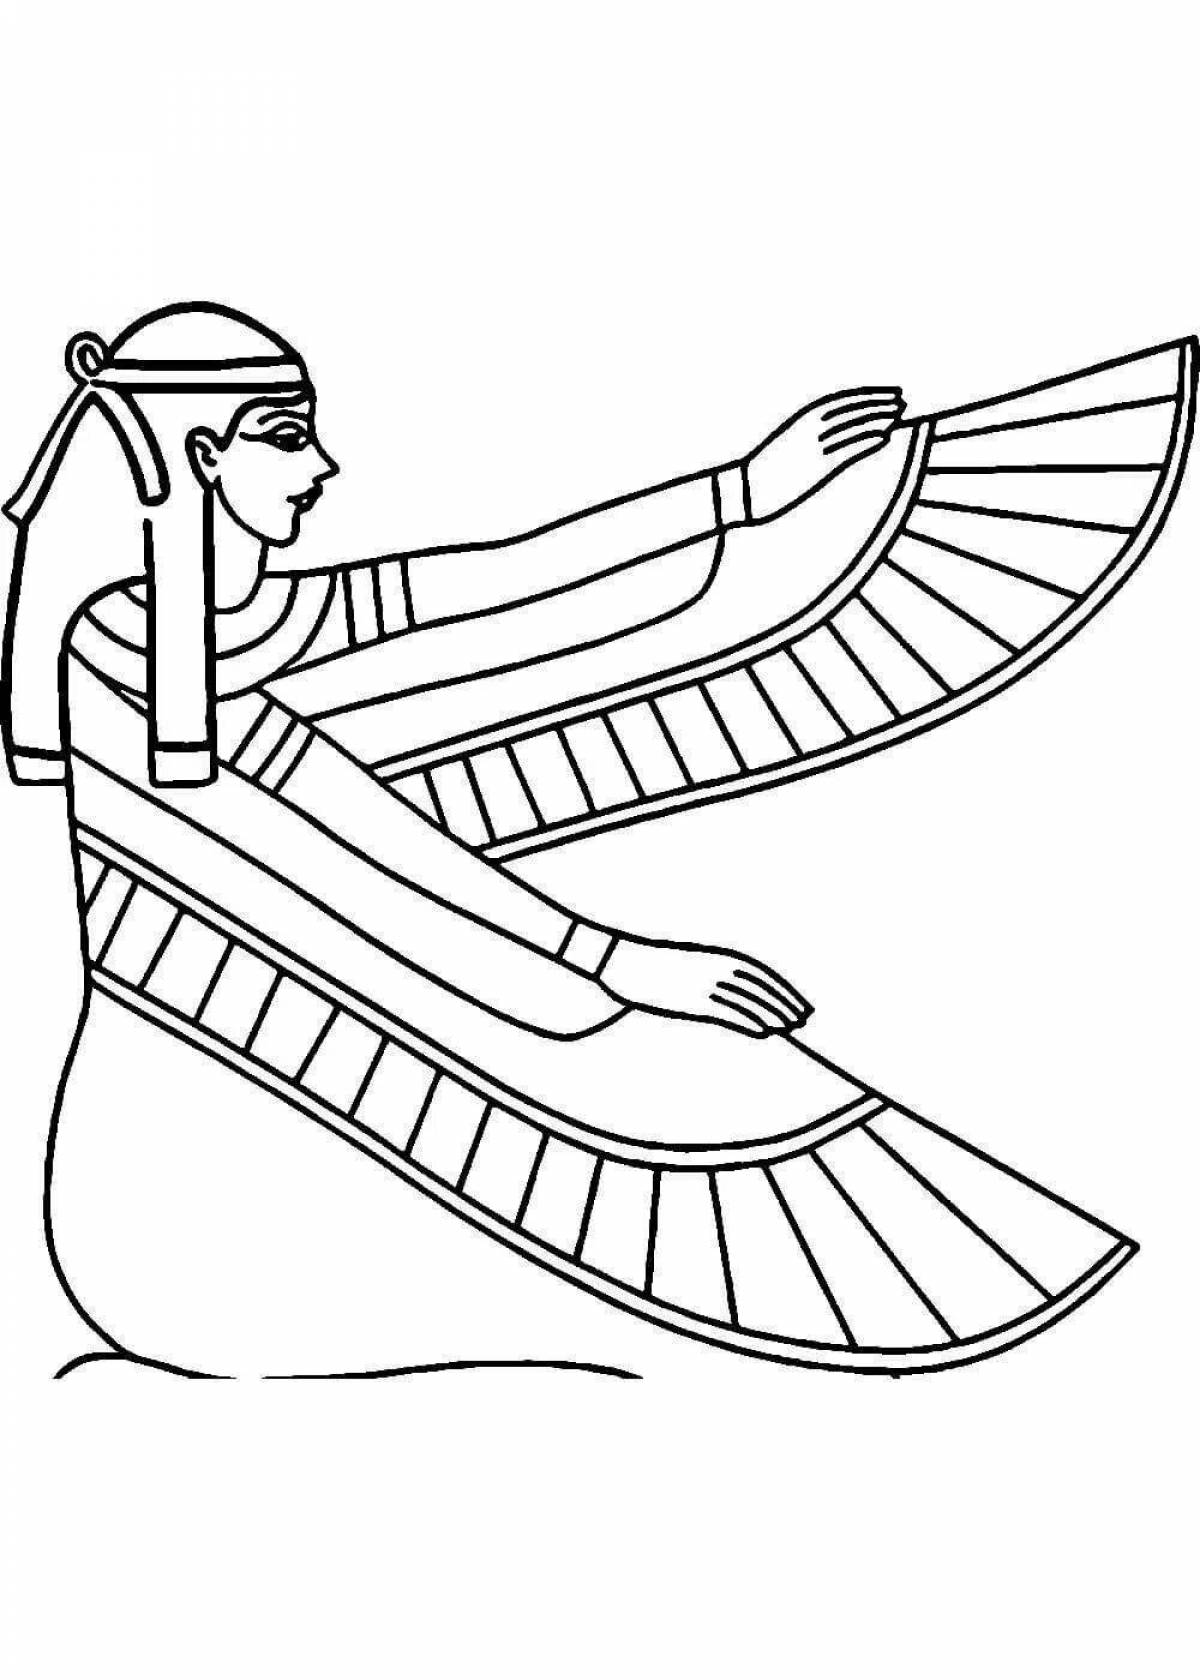 Tempting ancient egypt coloring book for kids